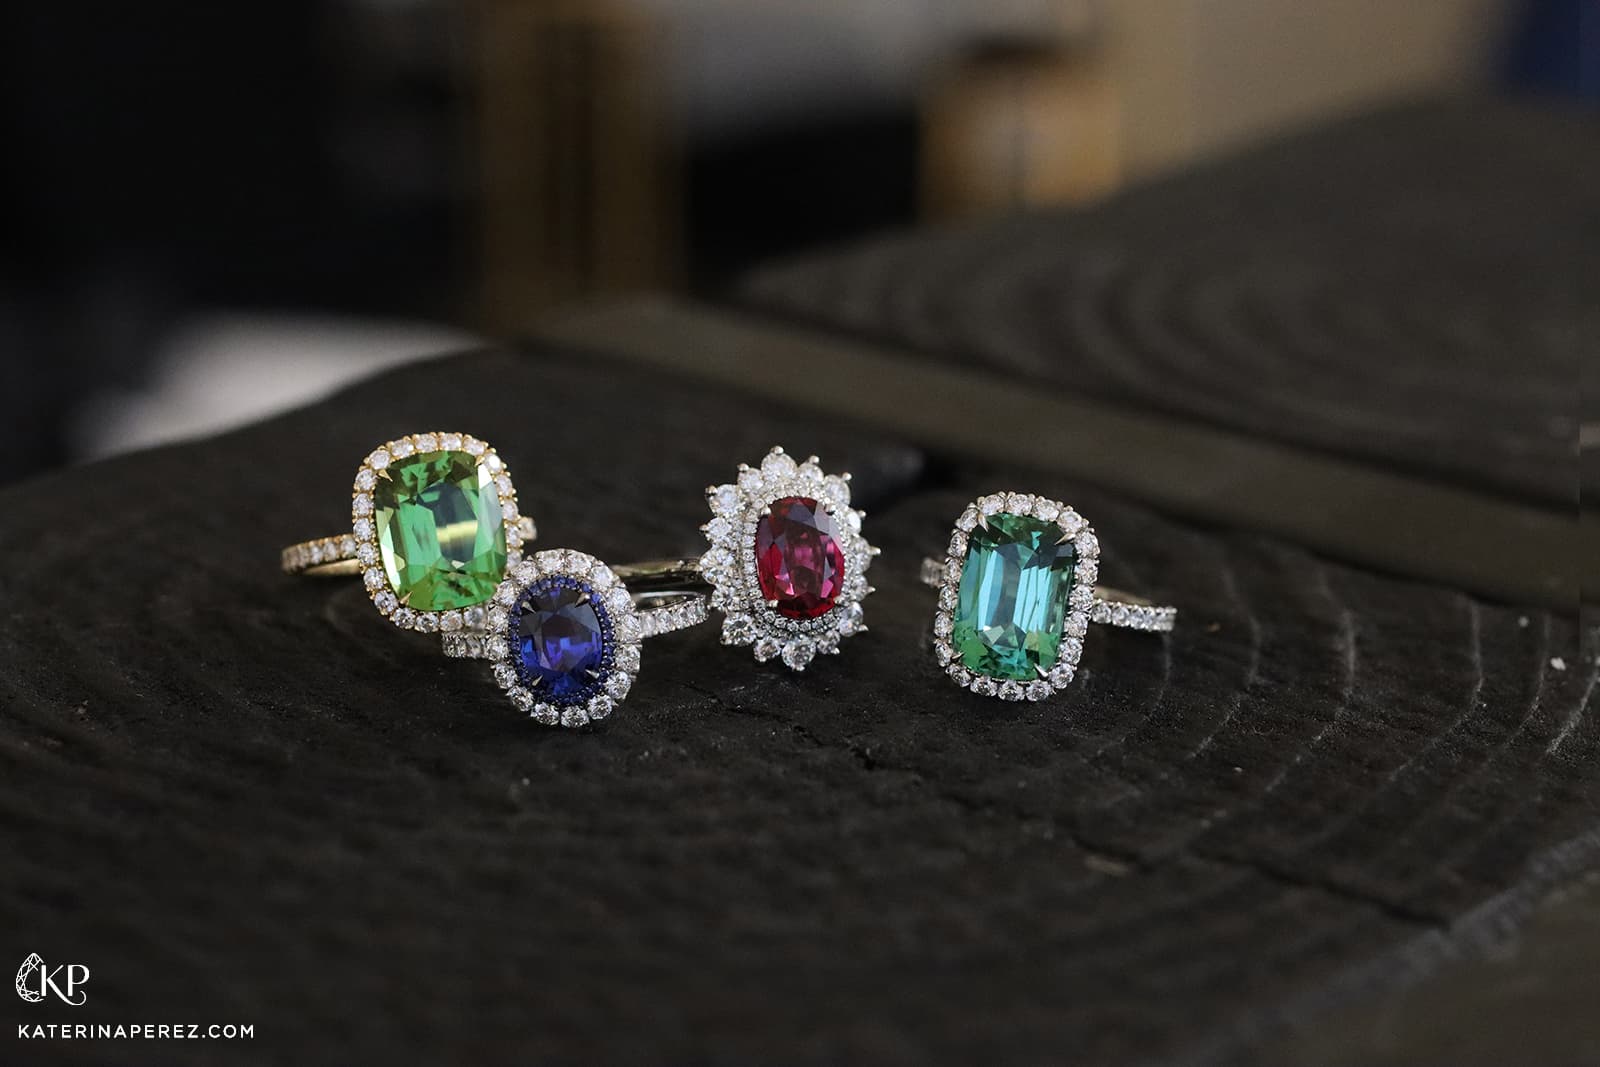 Coloured gemstone and diamond cocktail rings by Atelier Pino Spitaleri